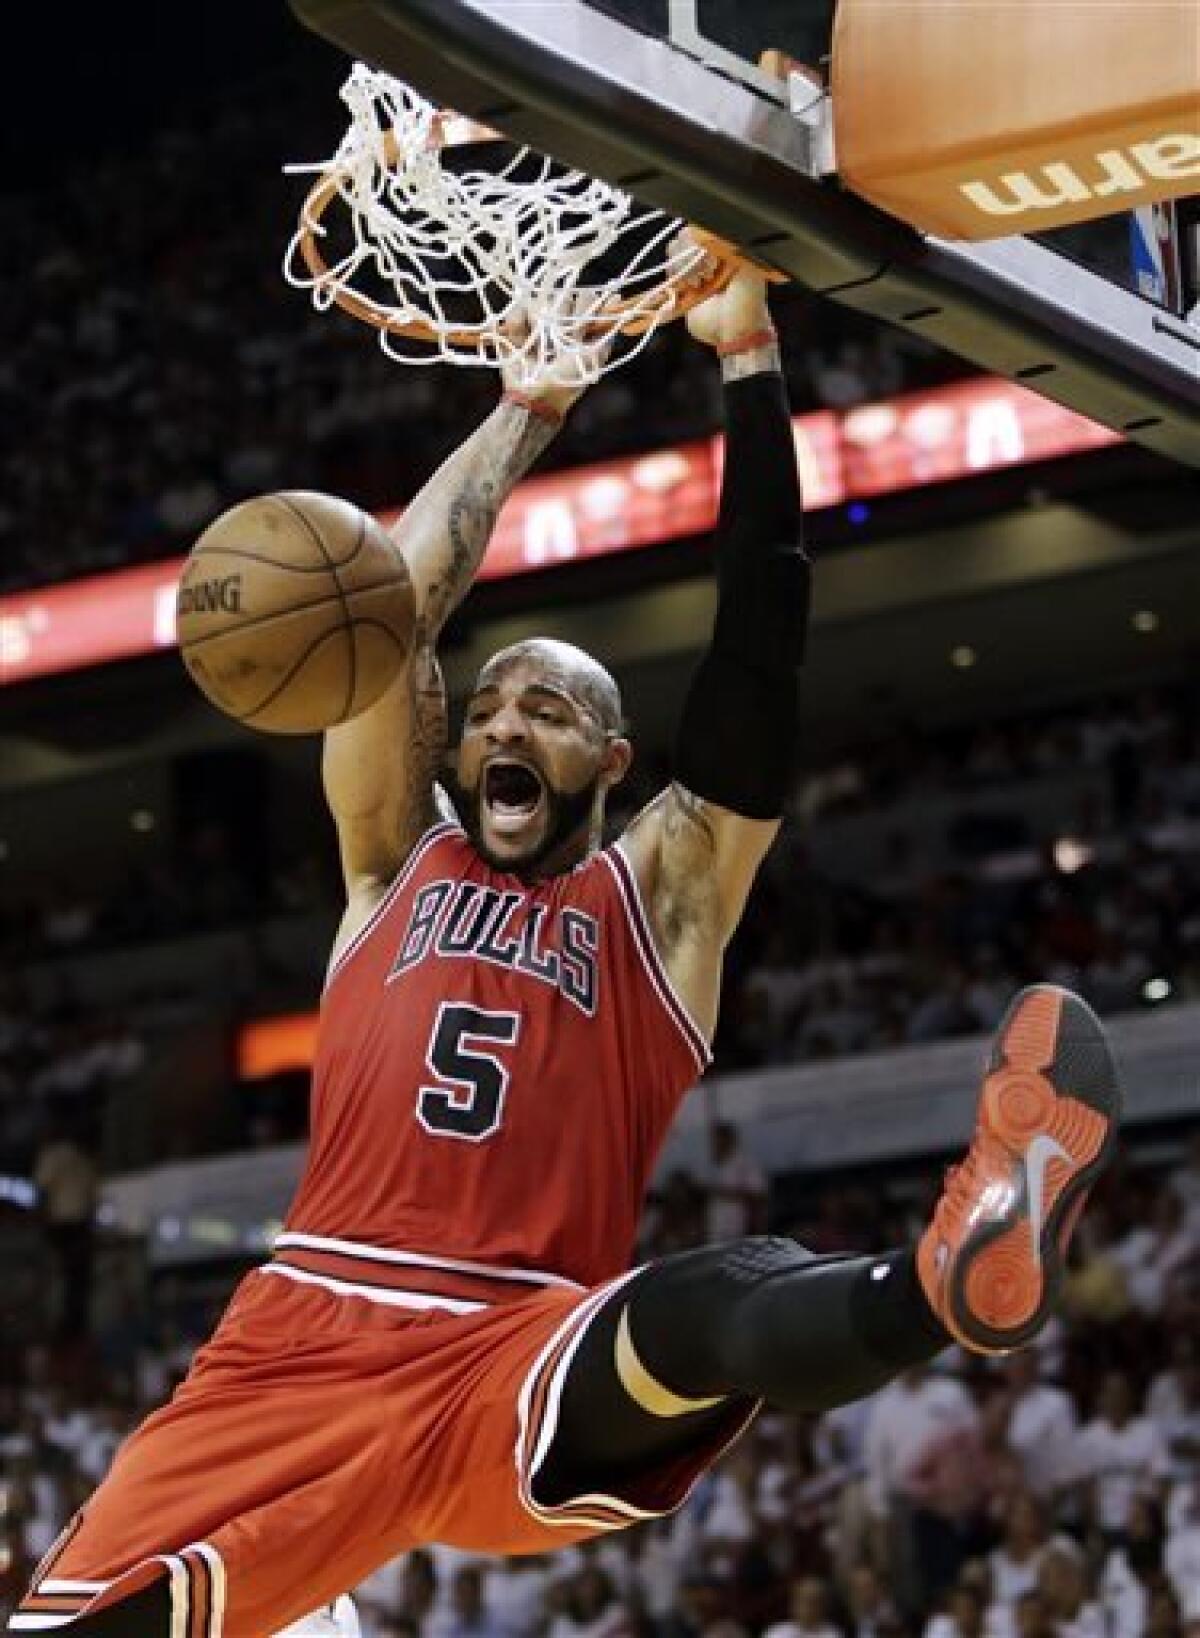 Chris died in my arms': NBA star Carlos Boozer on the murder that